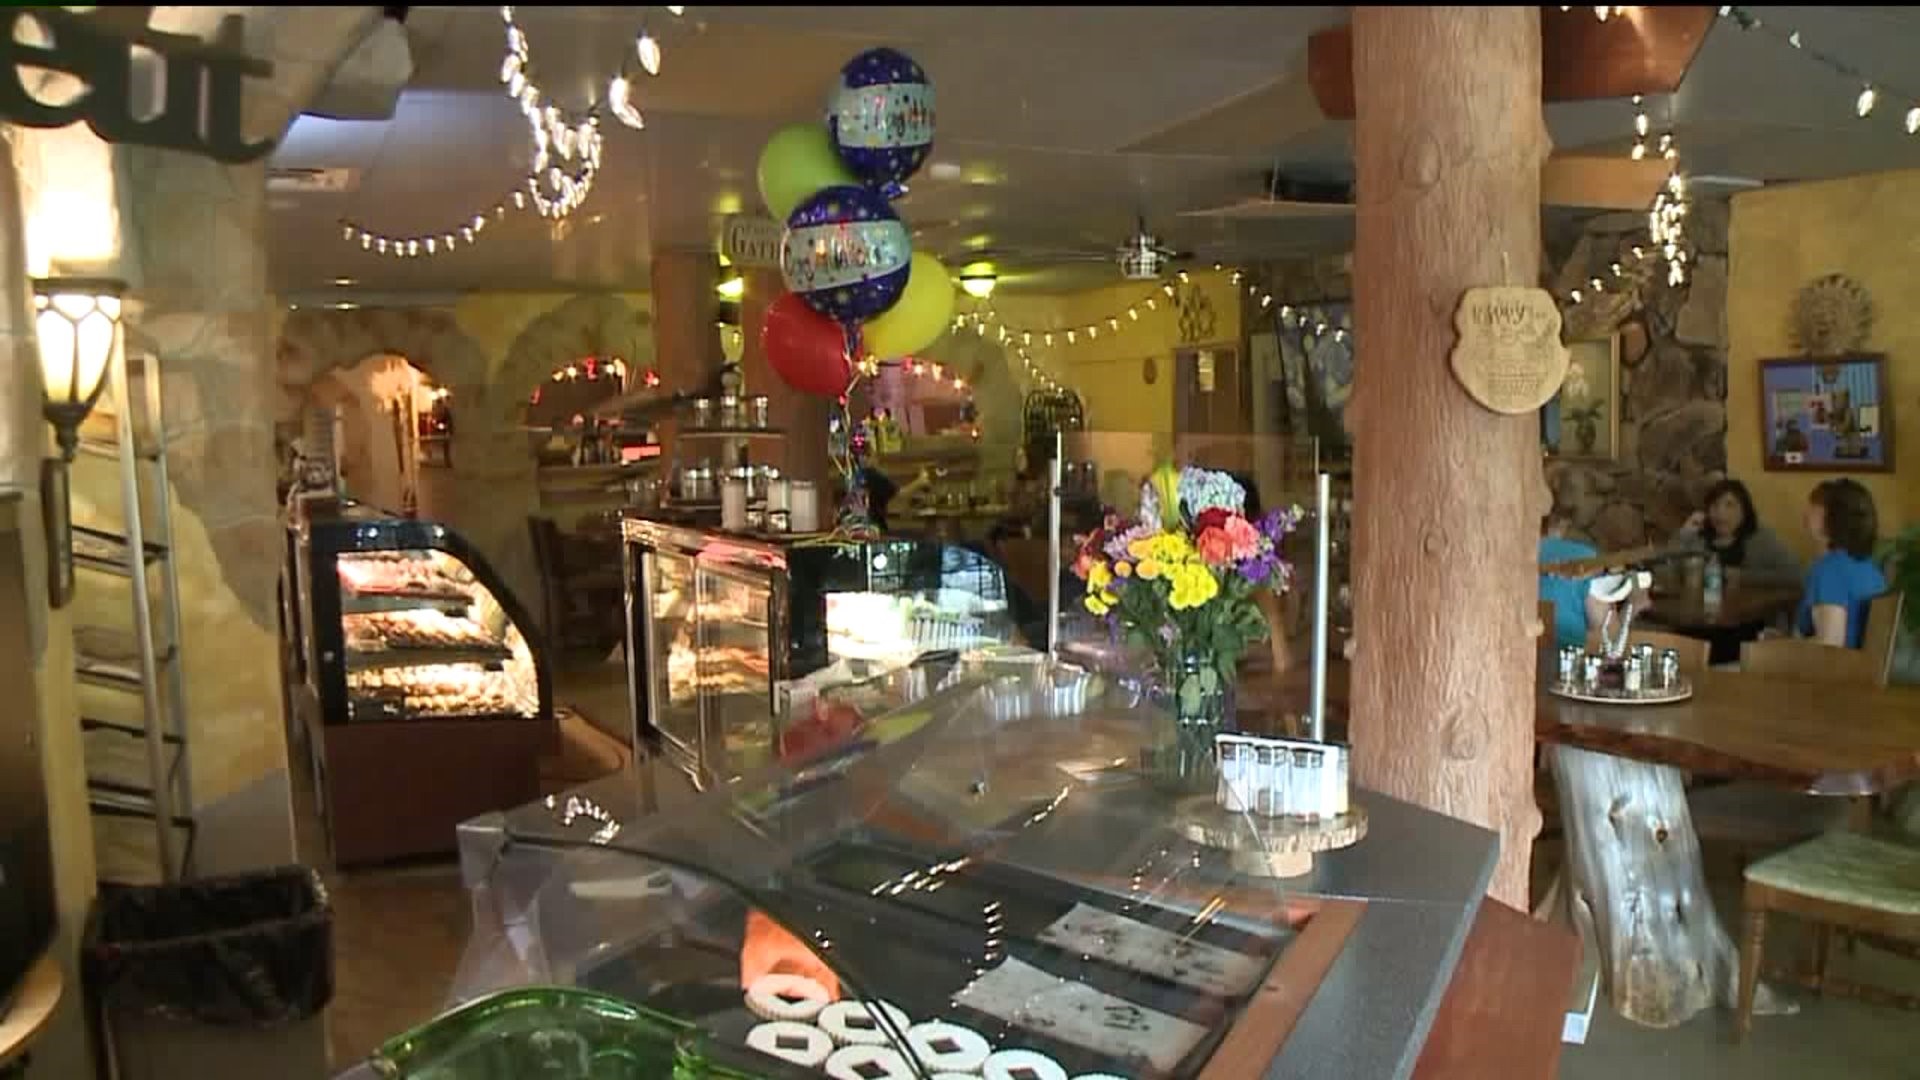 AmberDonia Bakery Comes to Wilkes-Barre